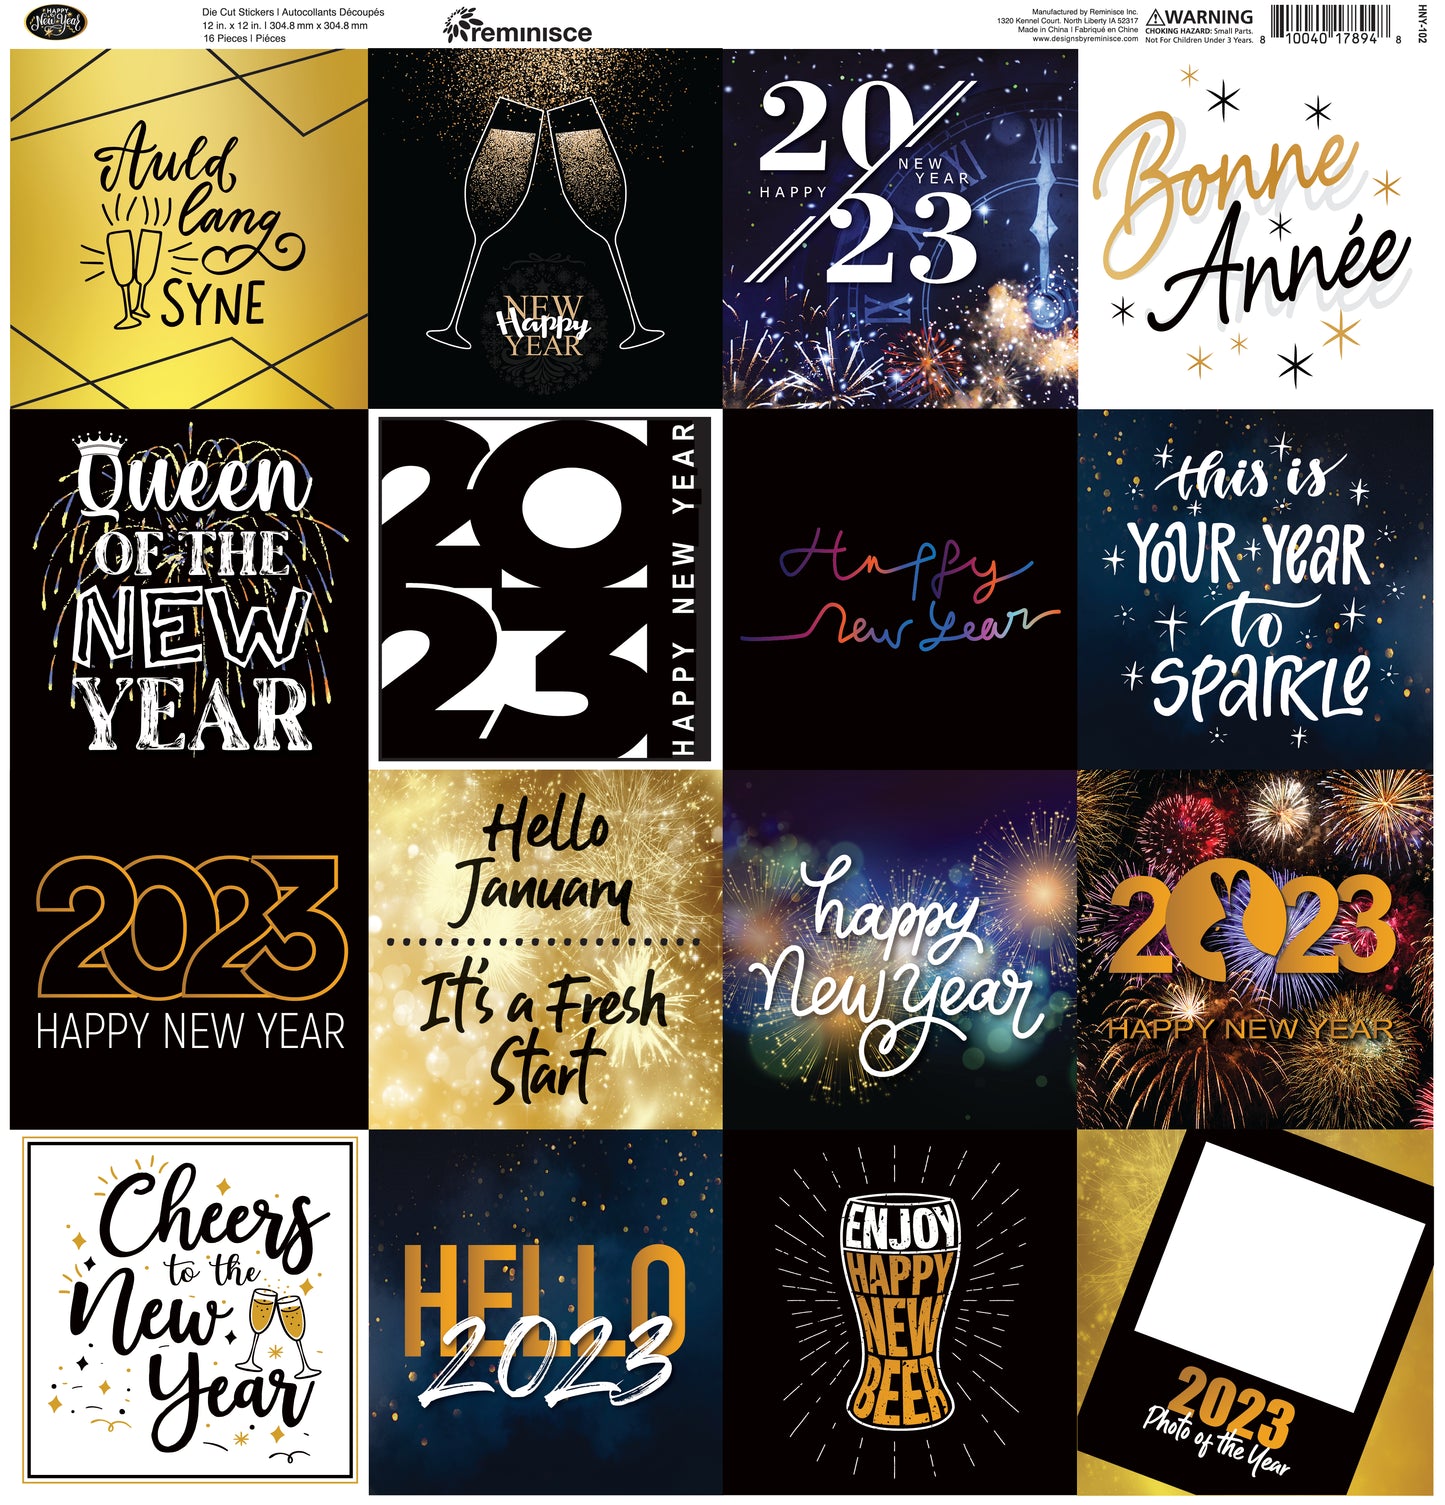 Reminisce 2023 New Year Stickers